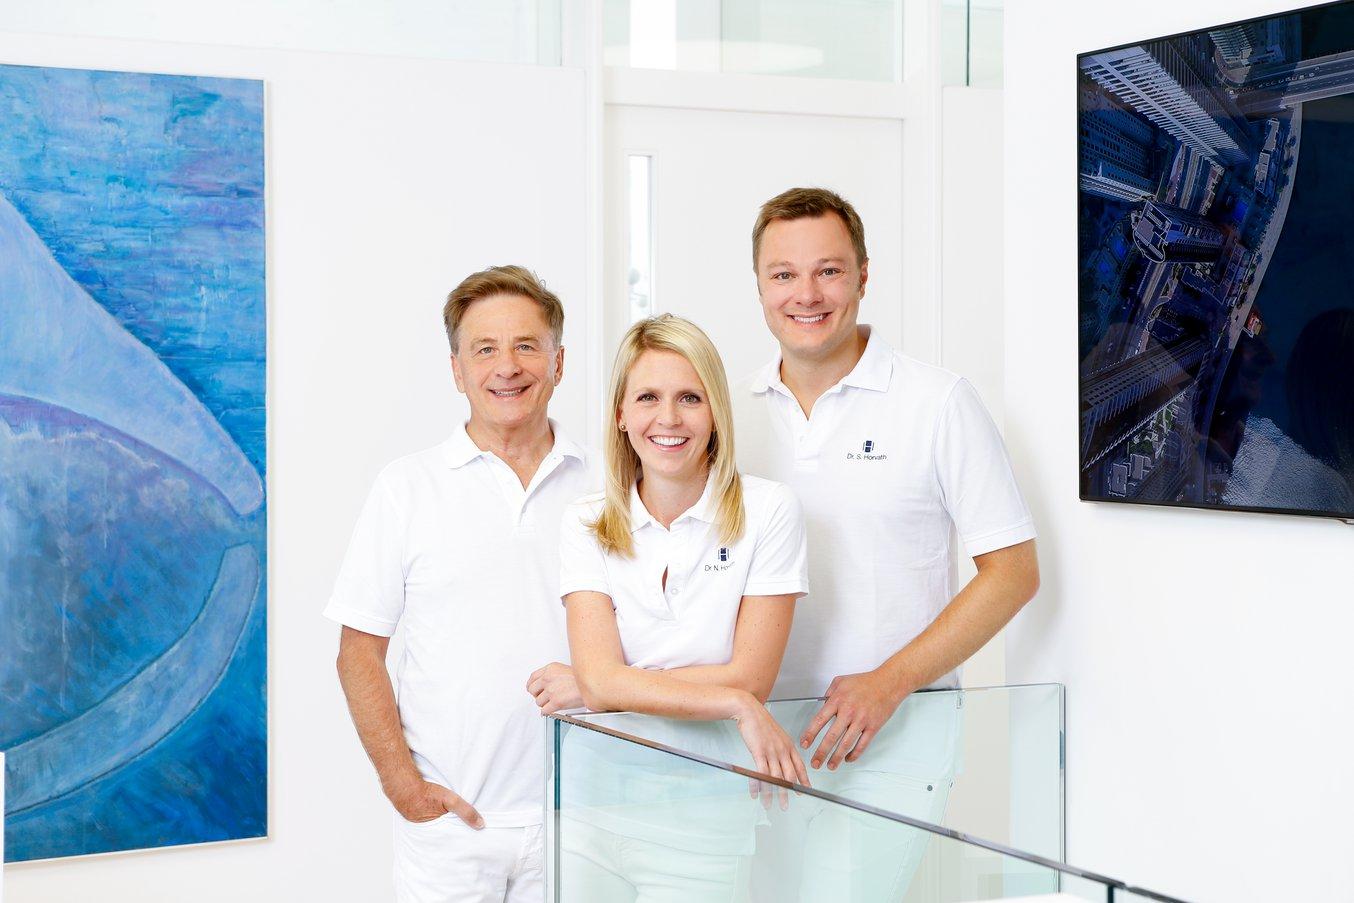 Dr. Sebastian Horvath (right) manages the family practice with his wife, Dr. Nicole Horvath, orthodontist, and his father, Dr. Domonkos Horvath, also a dentist.